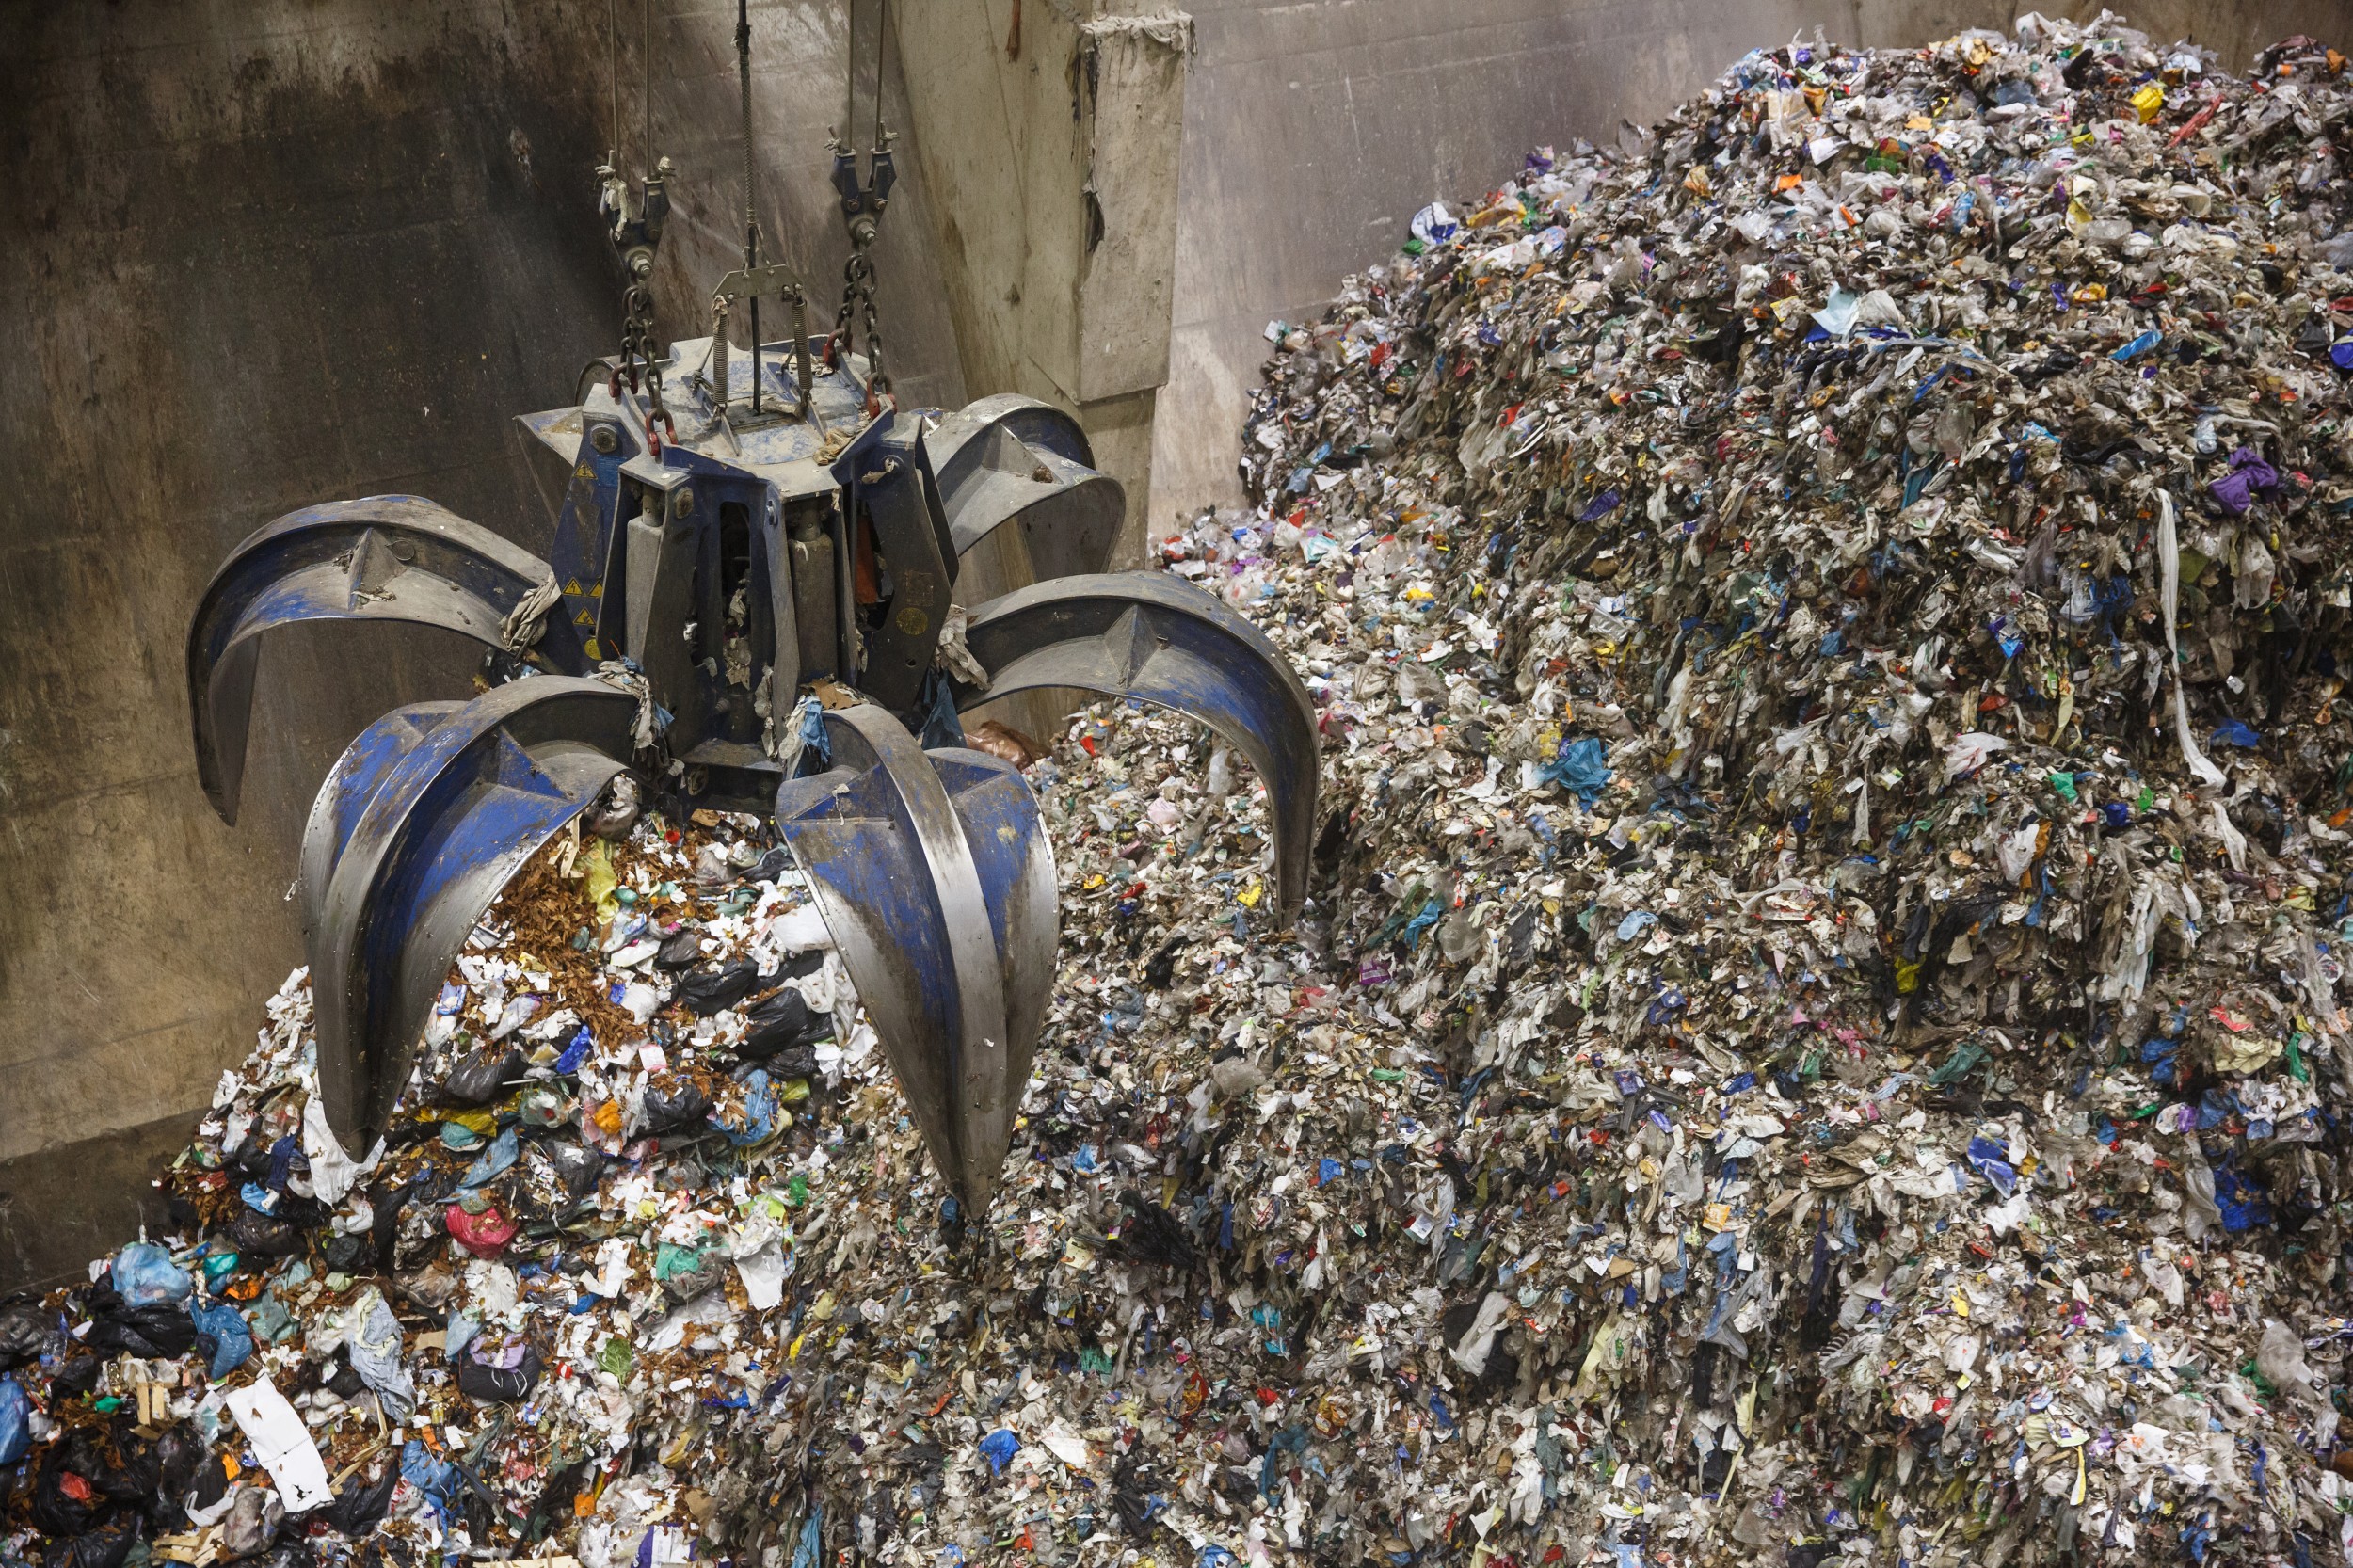 Mountains of rubbish: suitable methods allow for the generation of electricity and heat.